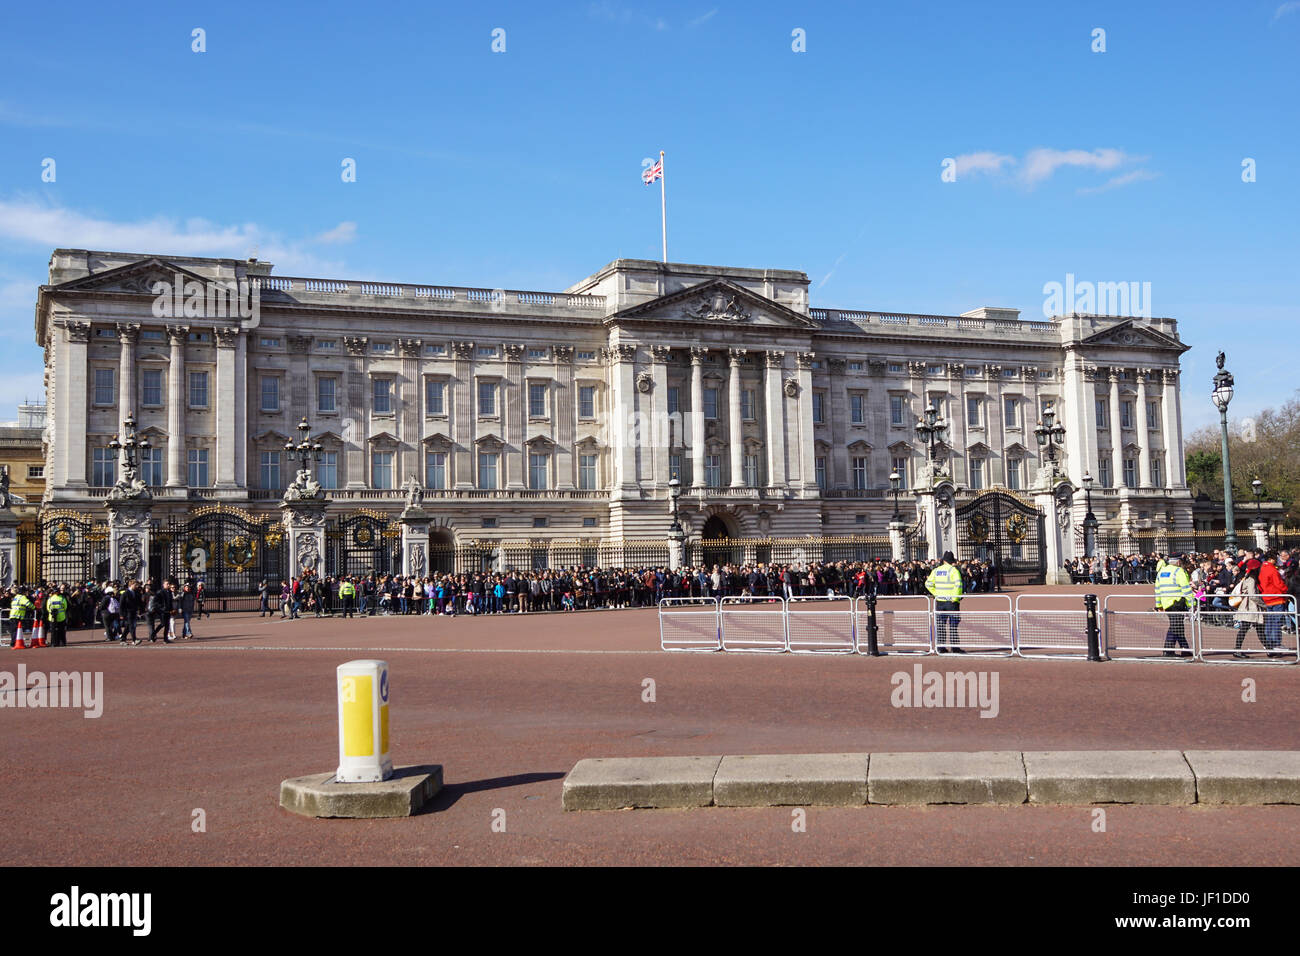 LONDON, UK - April 06 2017 : Crowds gather outside Buckingham Palace to watch the changing of the guard ceremony. Stock Photo